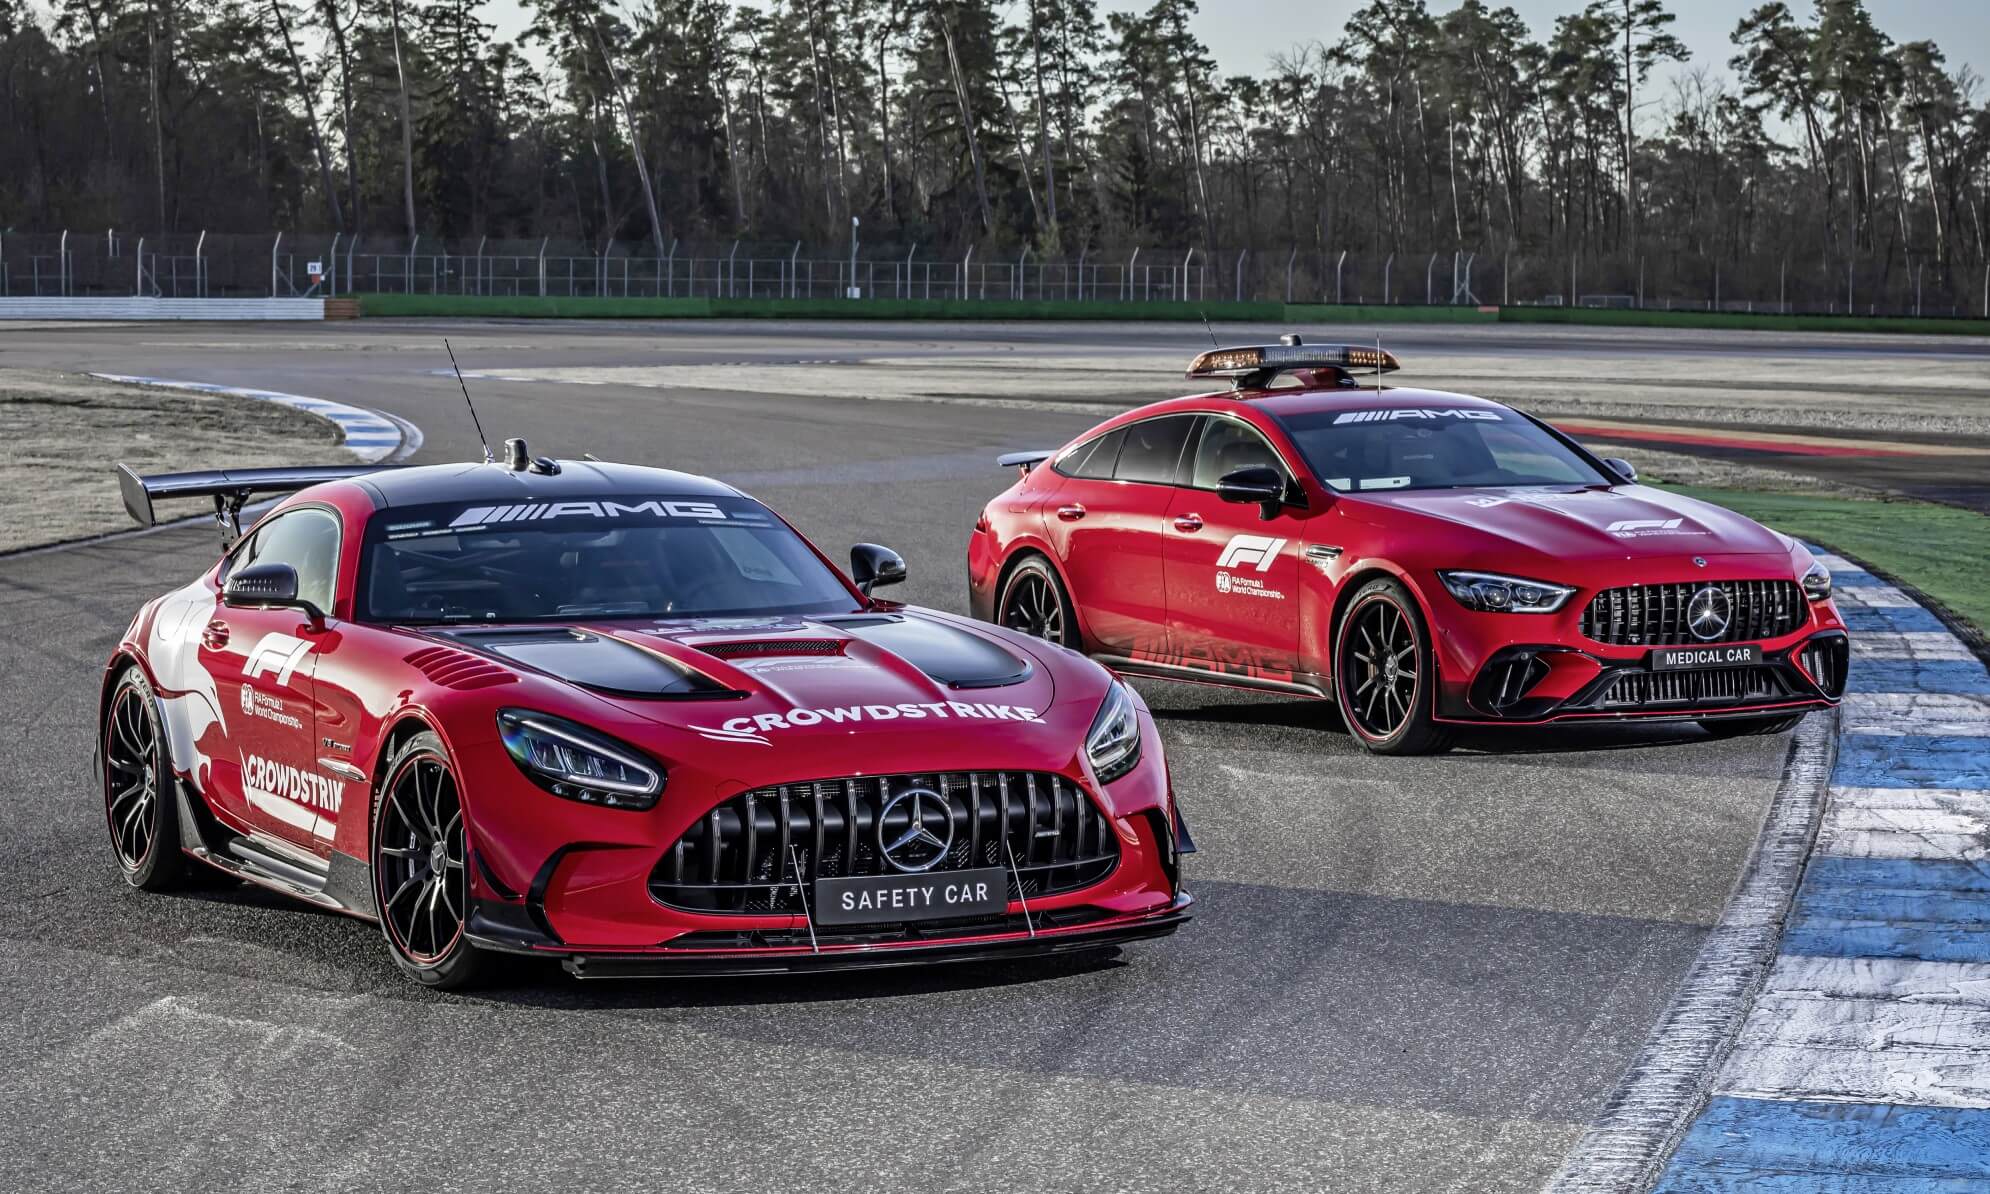 New Mercedes-AMG F1 Safety and Medical Cars